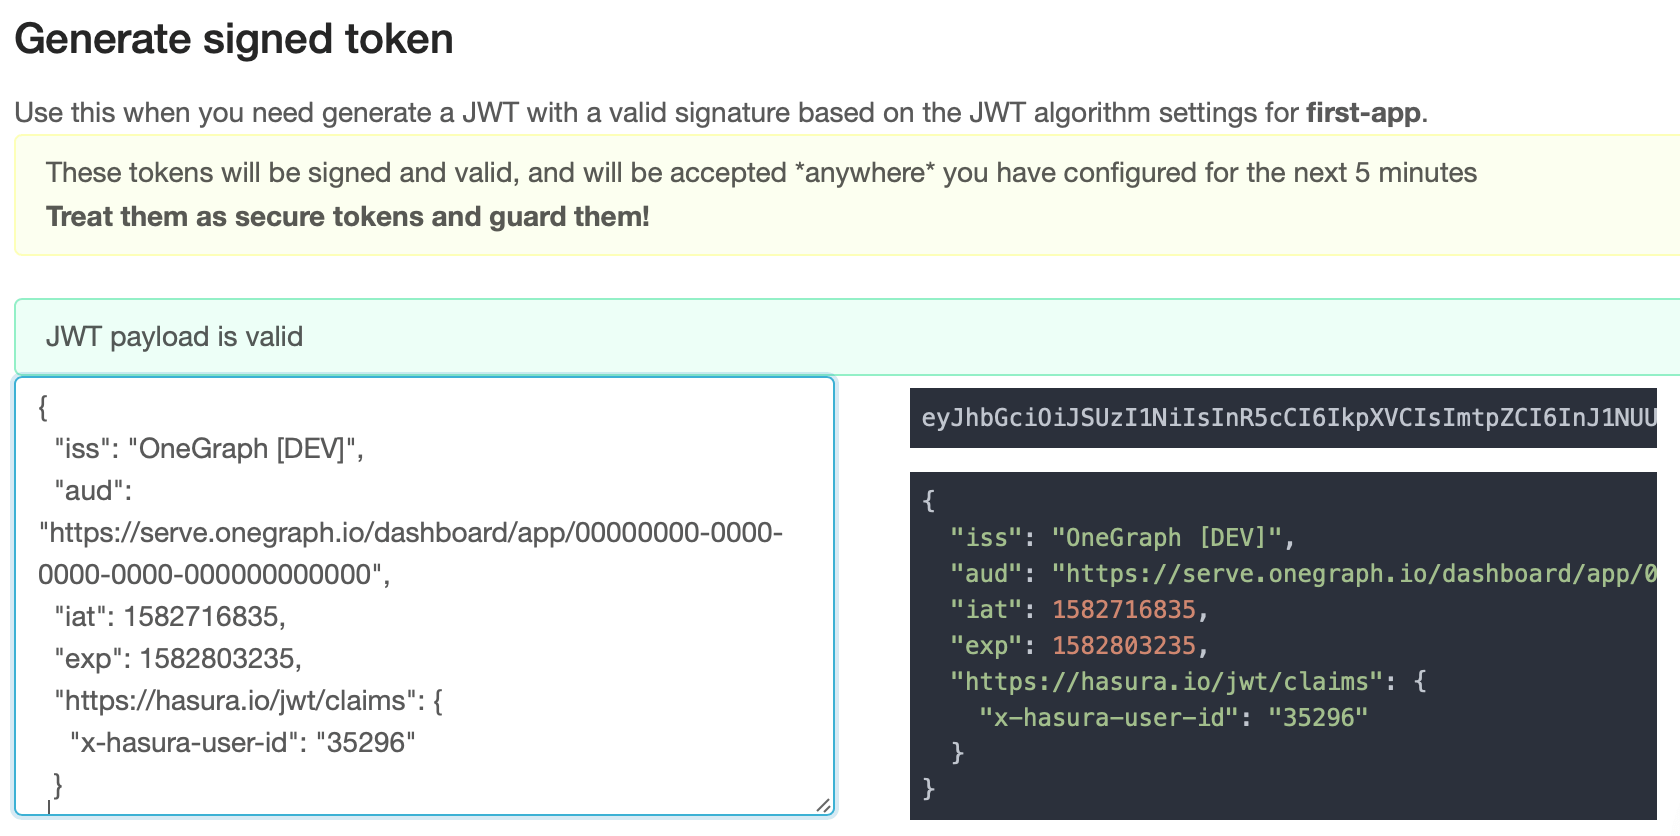 Use the JWT-signer form to quickly sign any JSON and test in the Hasura console